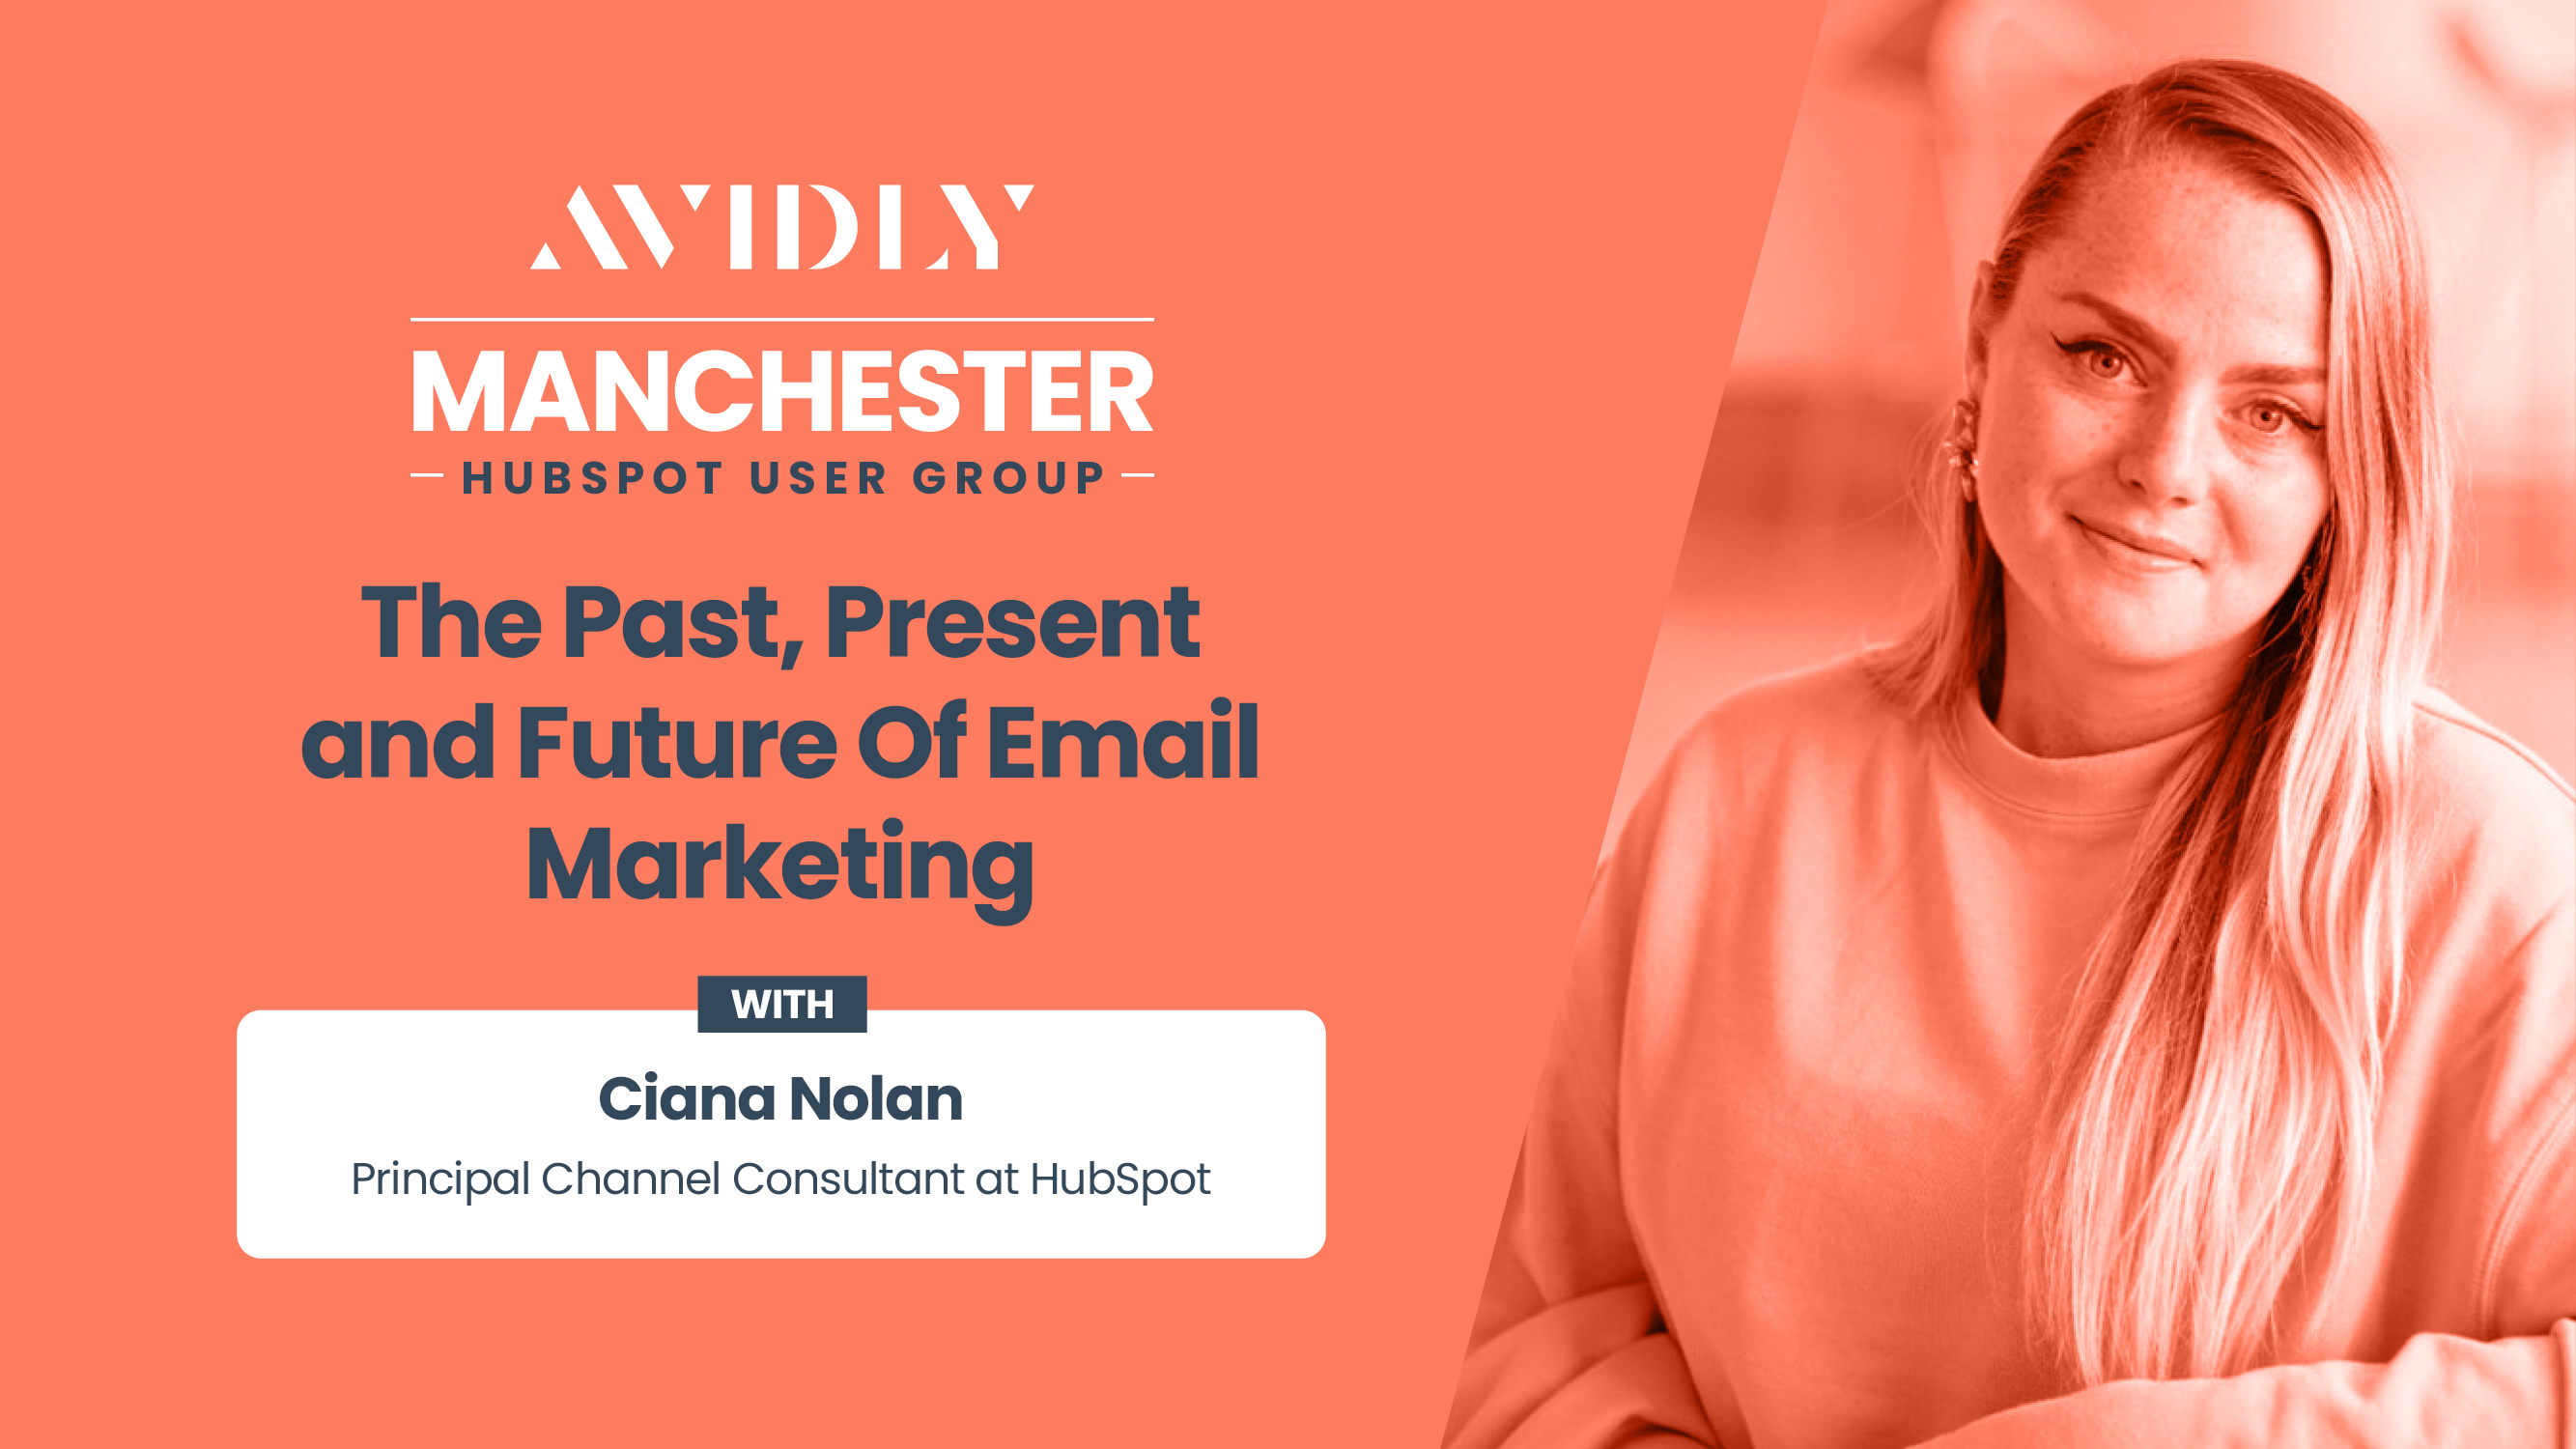 The past, present and future of email marketing — Manchester HUG round-up